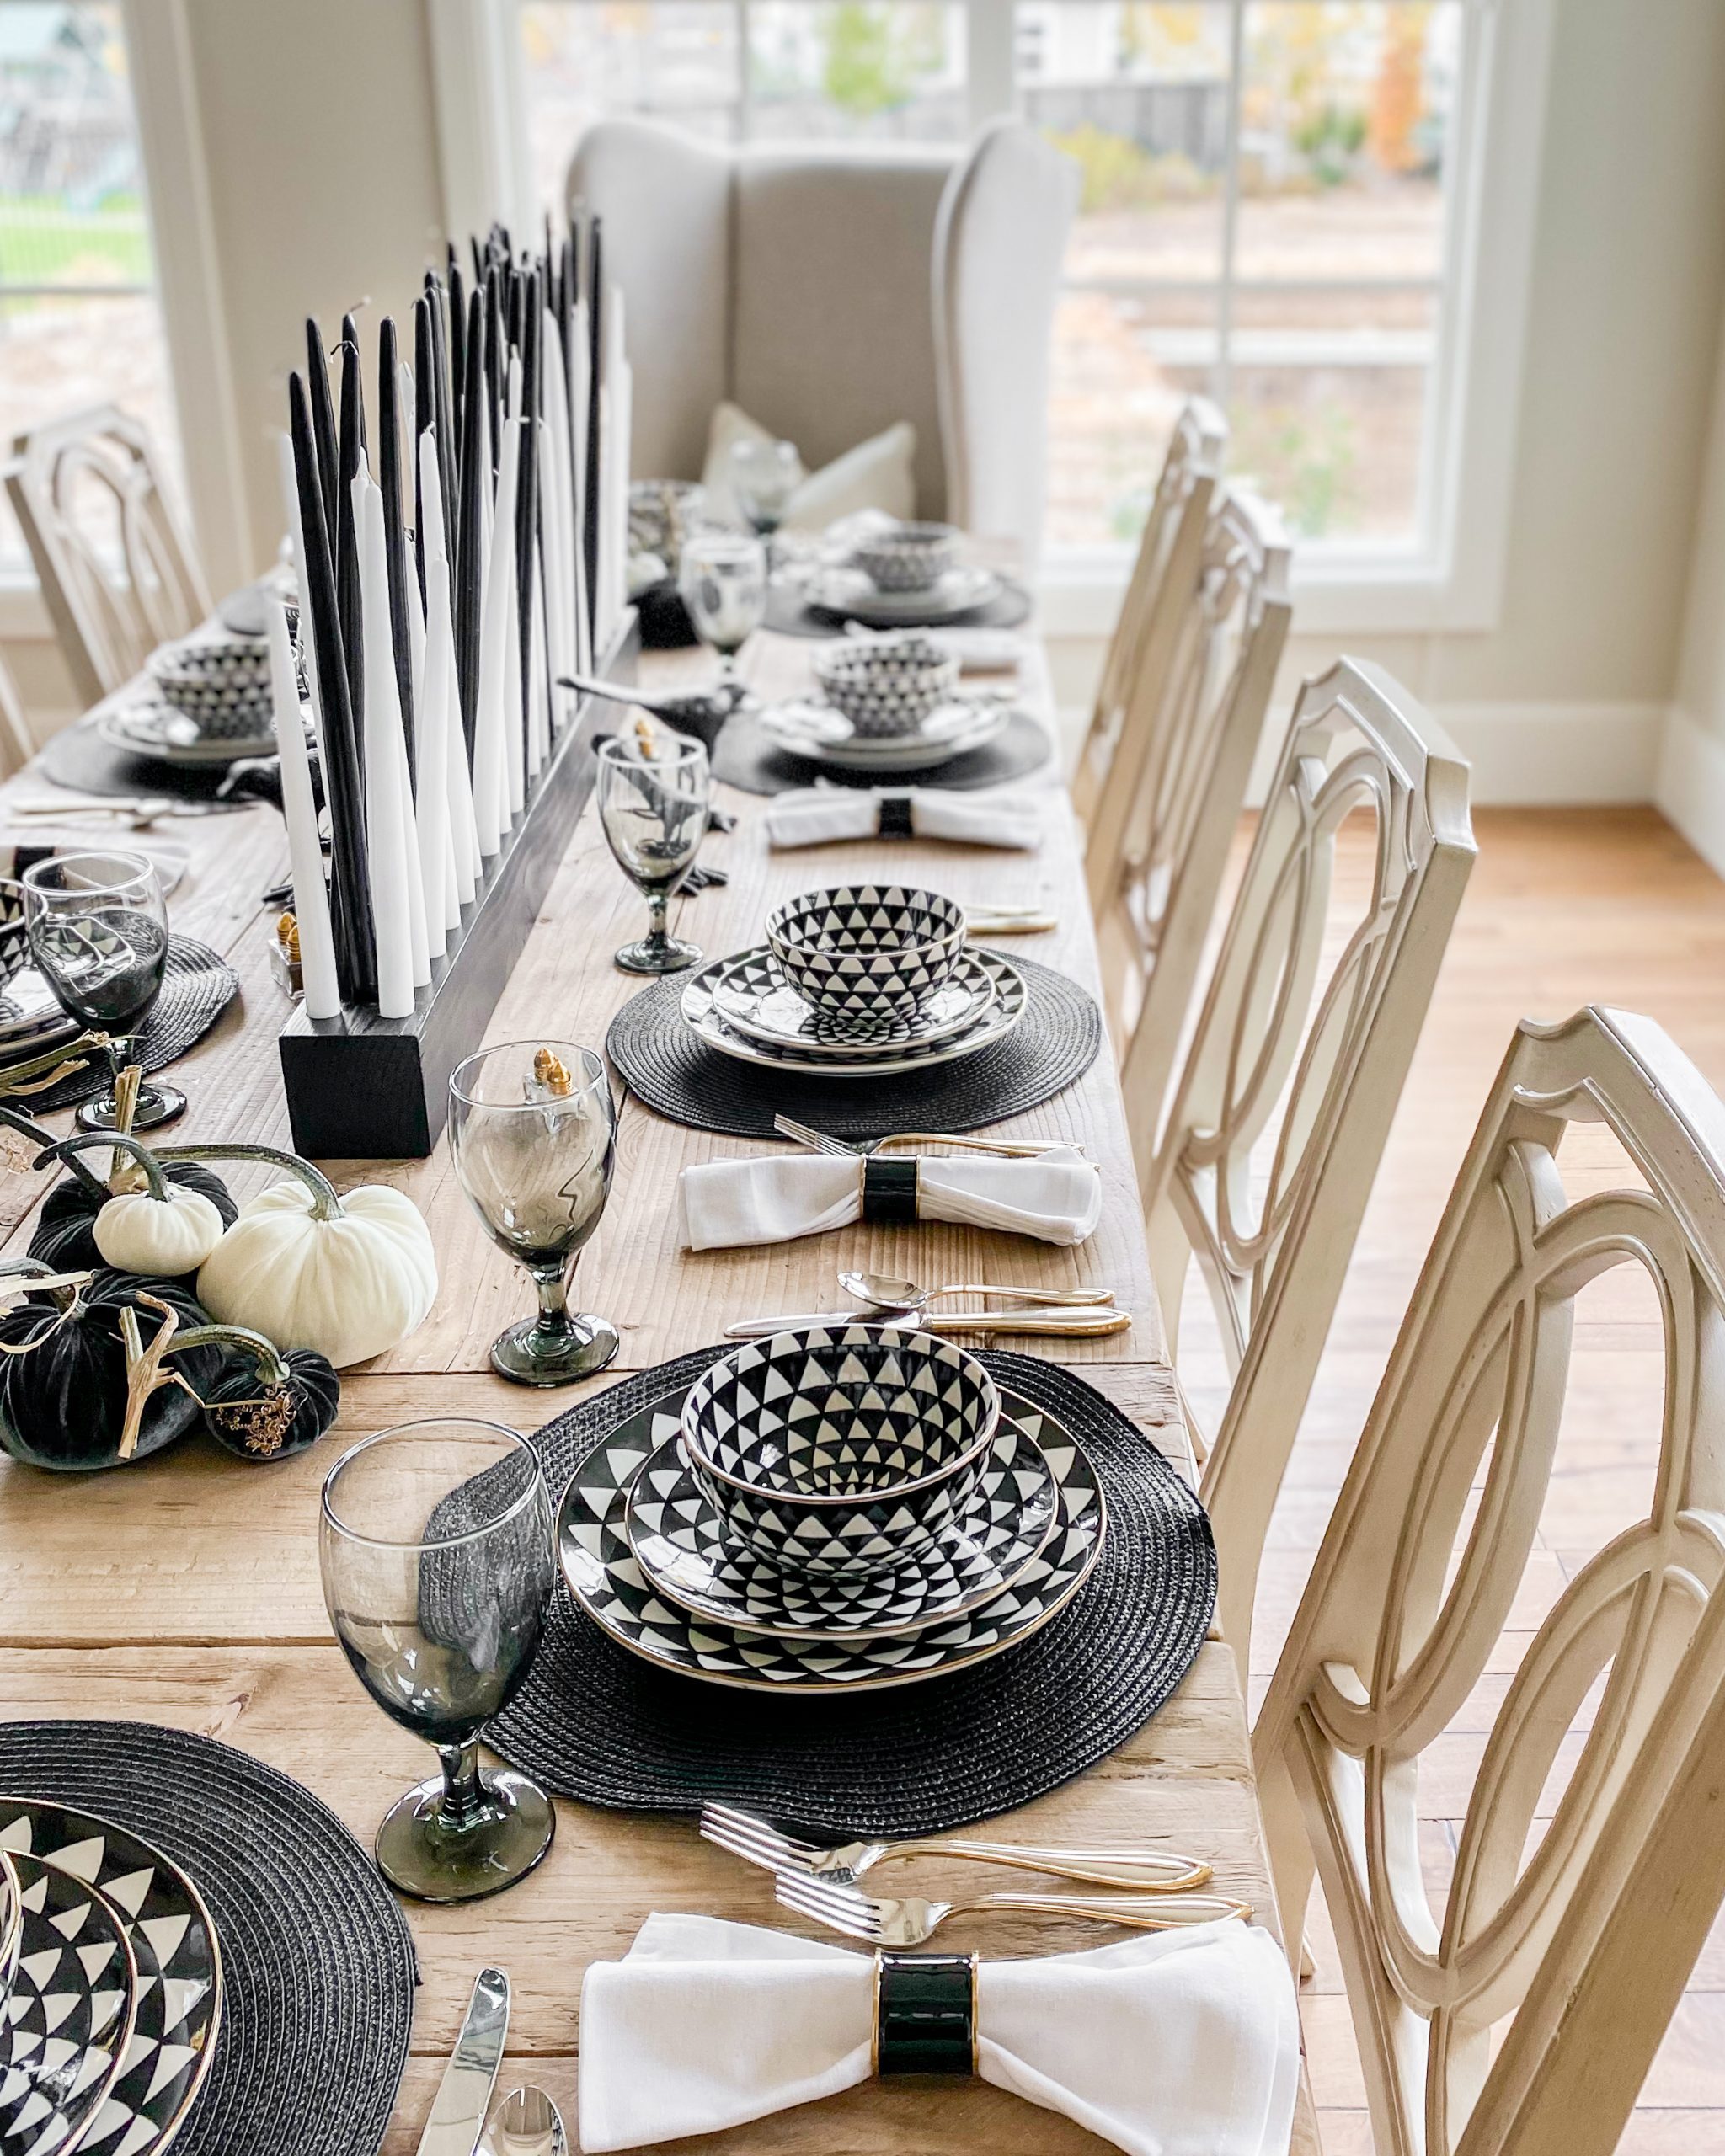 styled dining table place settings